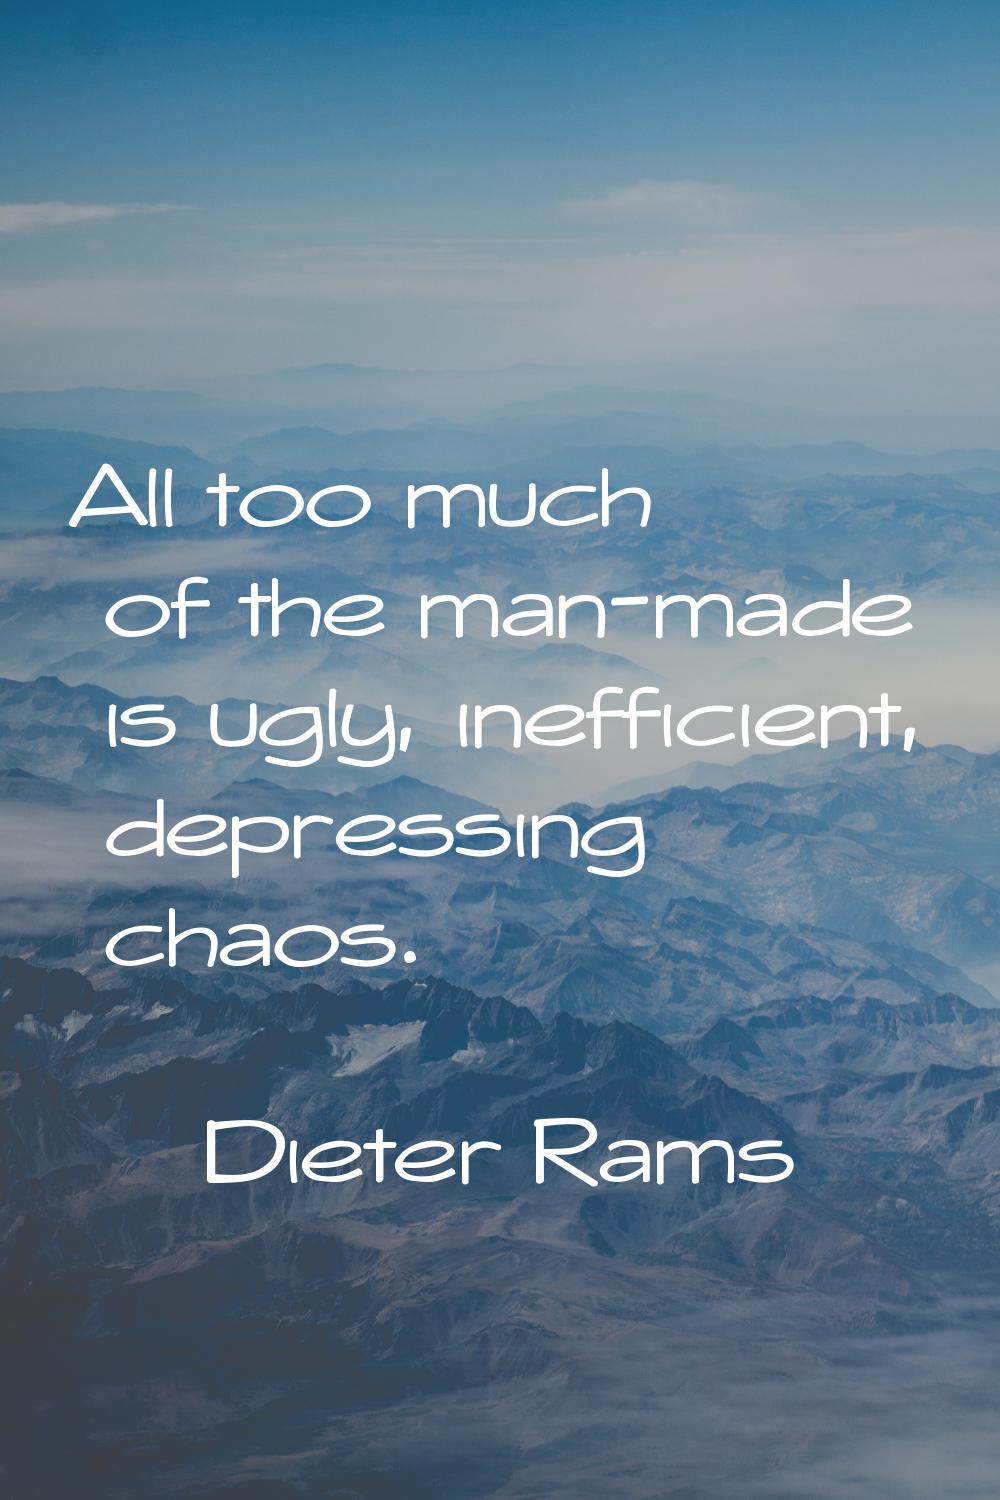 All too much of the man-made is ugly, inefficient, depressing chaos.